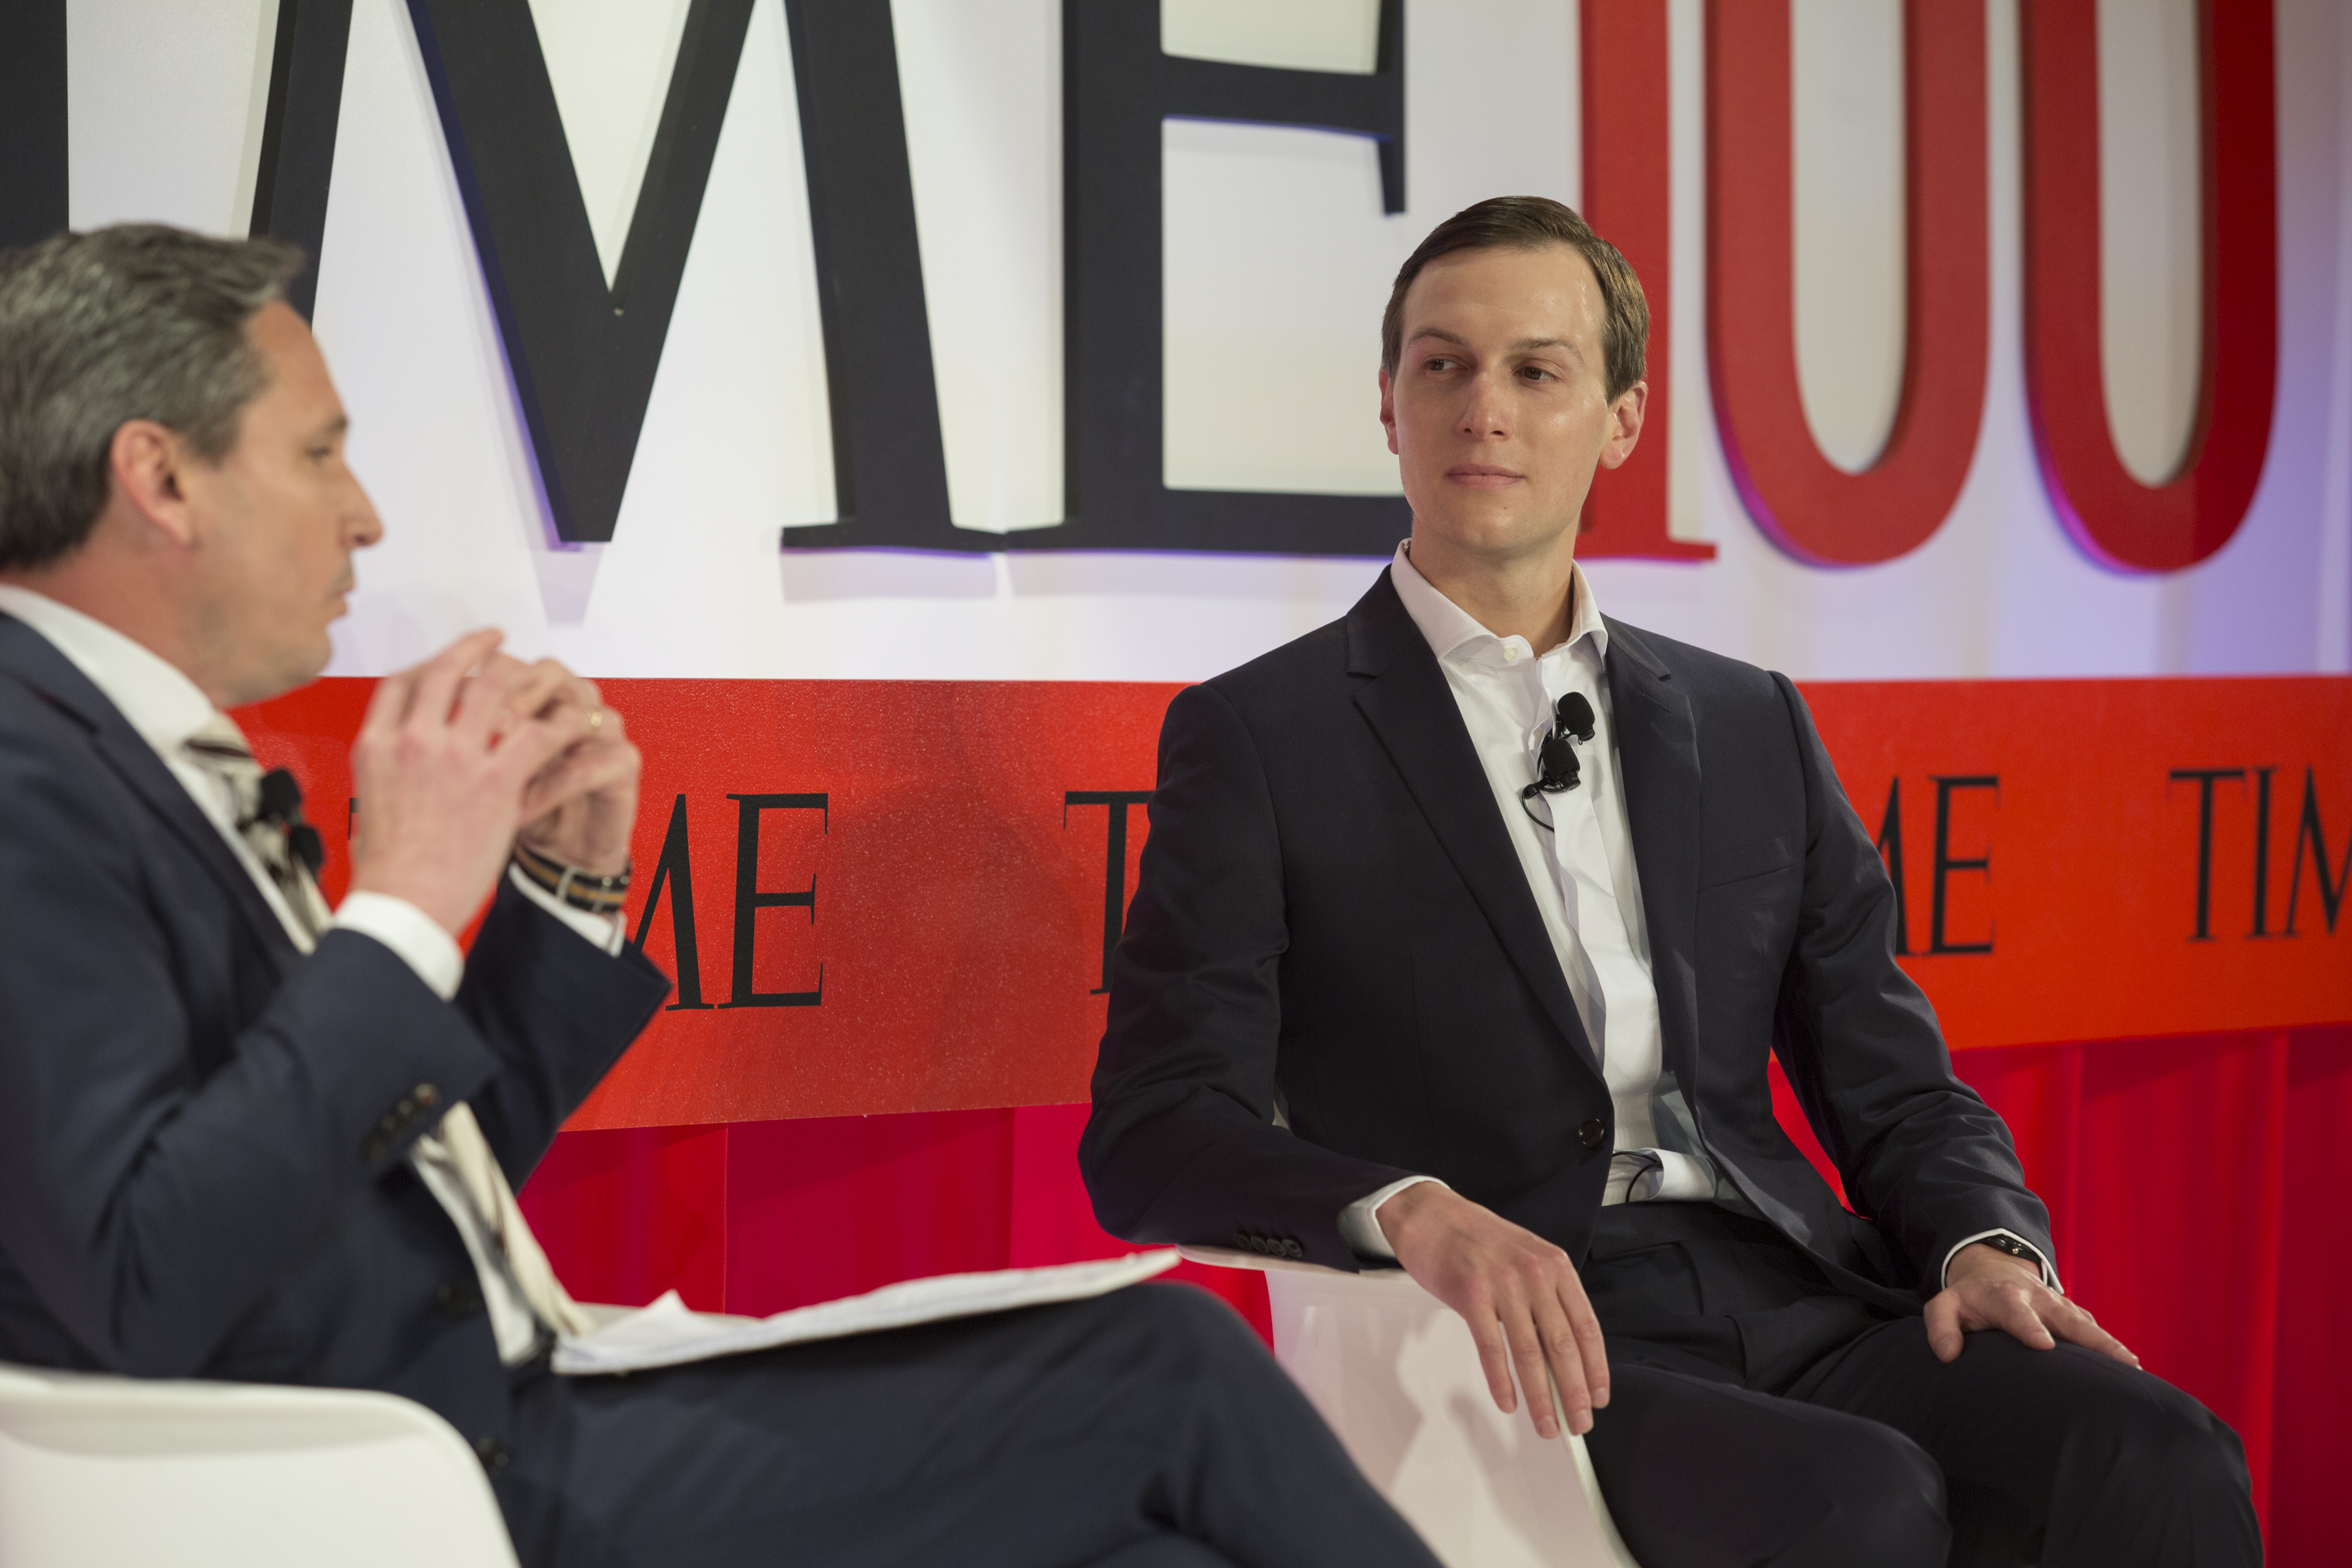 Assistant and Senior Adviser to the President Jared Kushner speaks to Brian Bennett, Senior White House Correspondent for TIME during an interview at the TIME100 Summit in New York, on April 23, 2019.